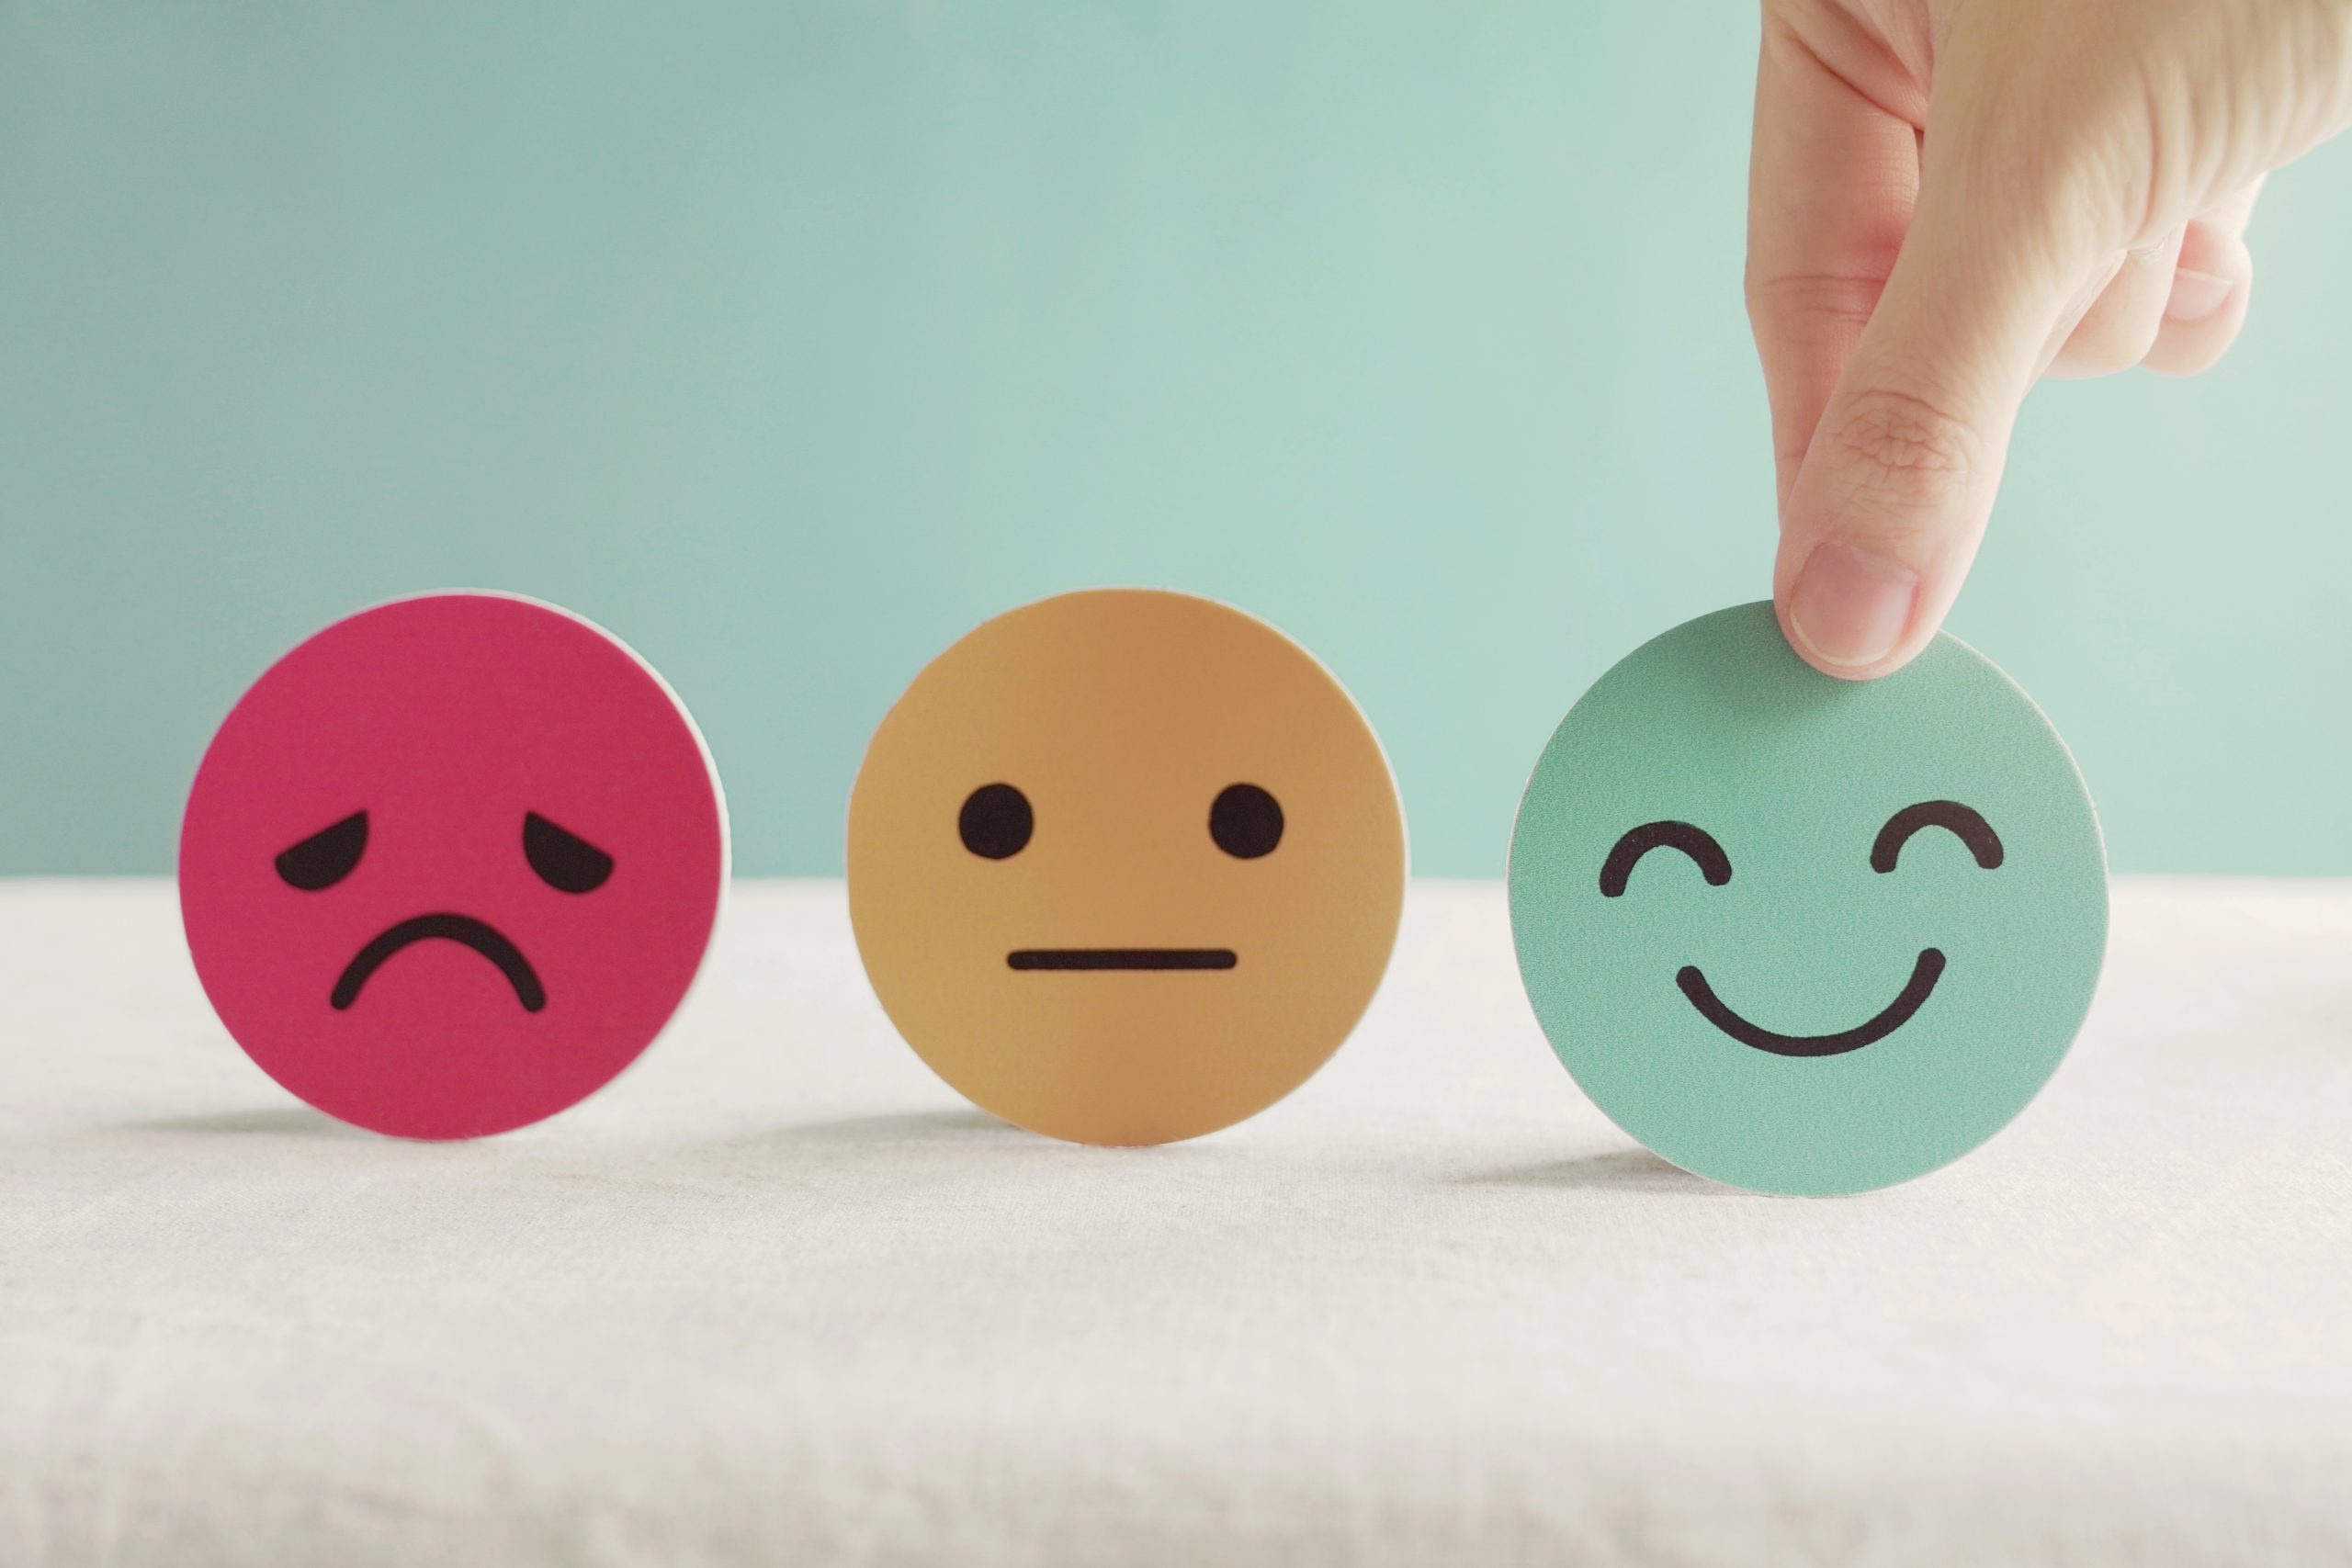 Person pointing towards three emojis, one frowning, one with a blank expression and one smiling